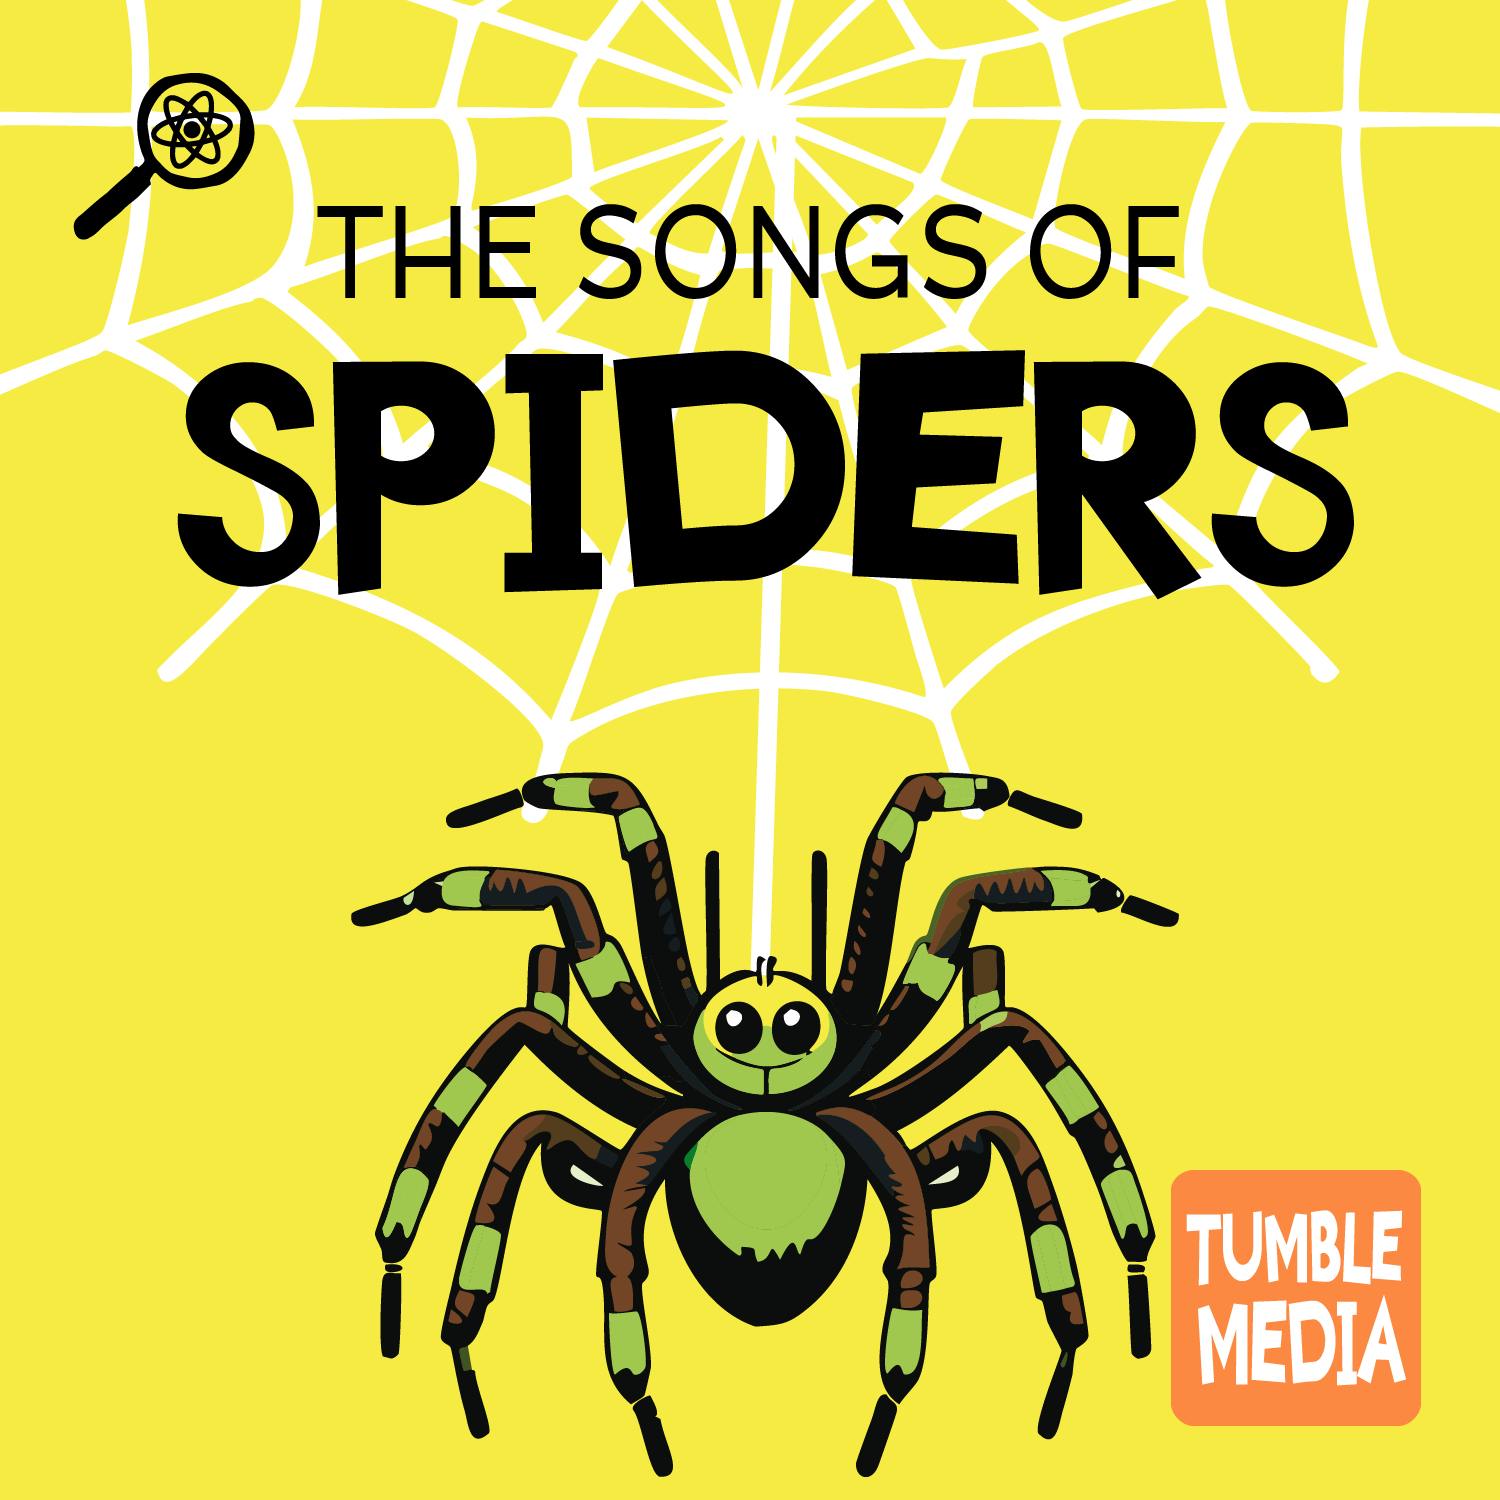 The Songs of Spiders